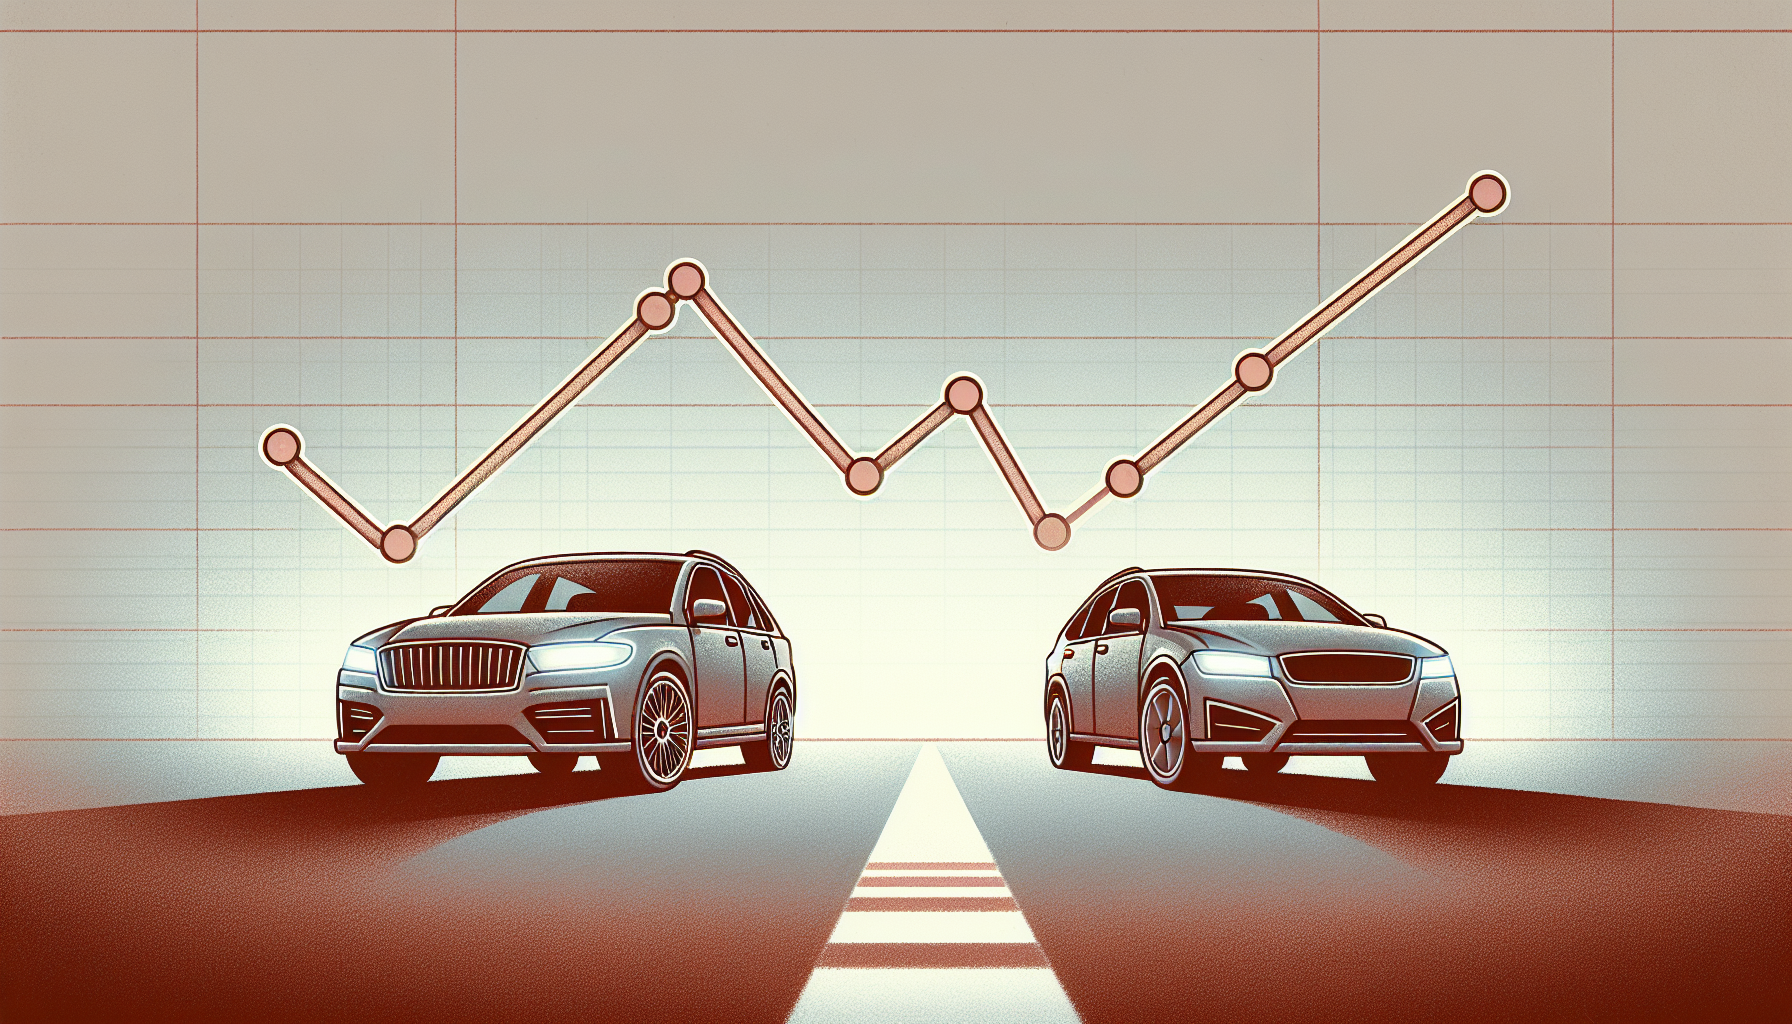 Comparison of depreciation rates between new and used cars